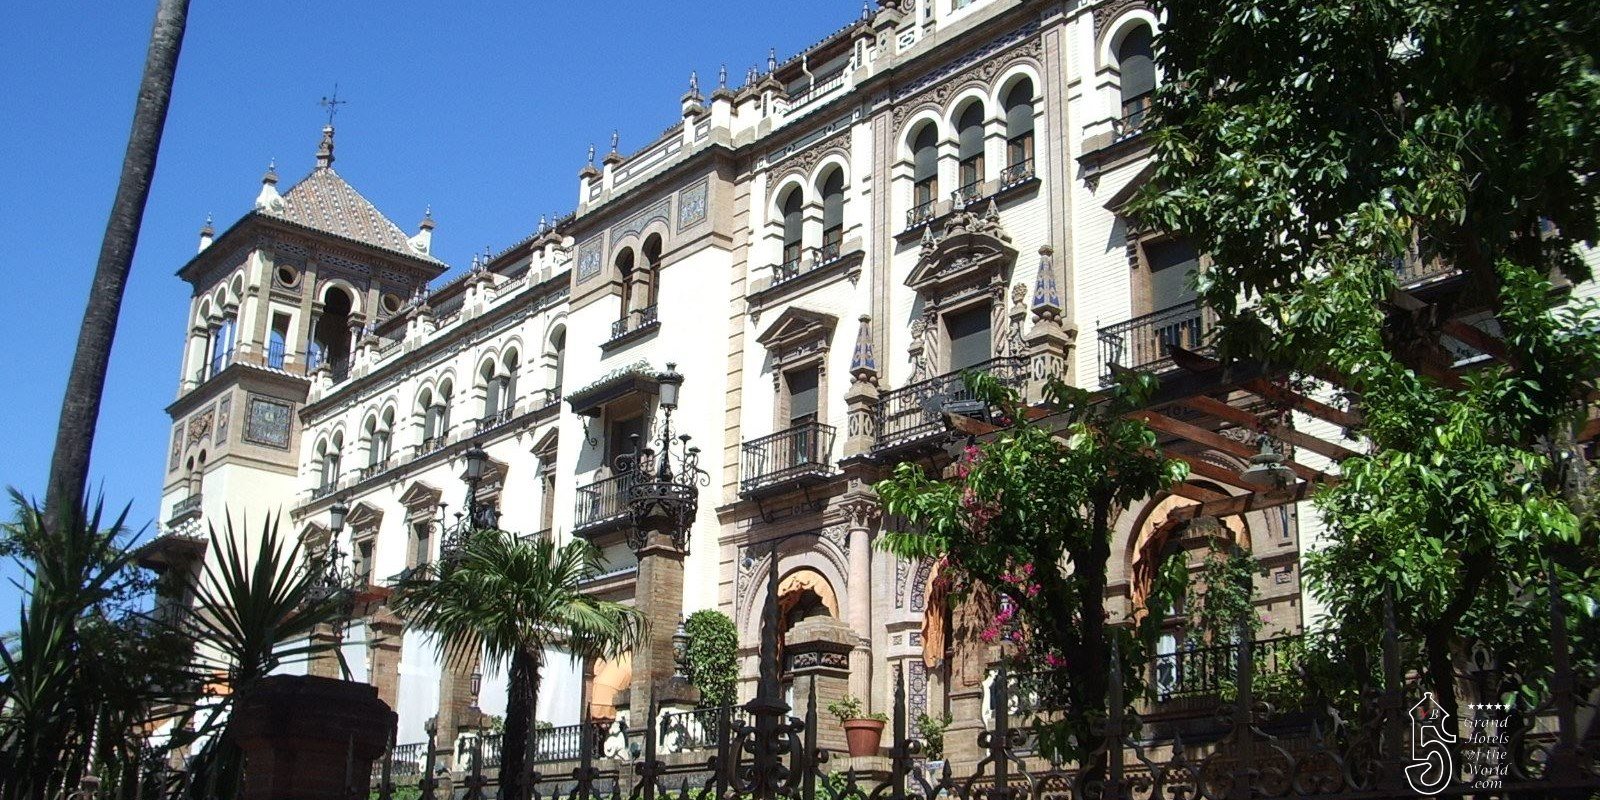 Hotel Alfonso XIII in Seville